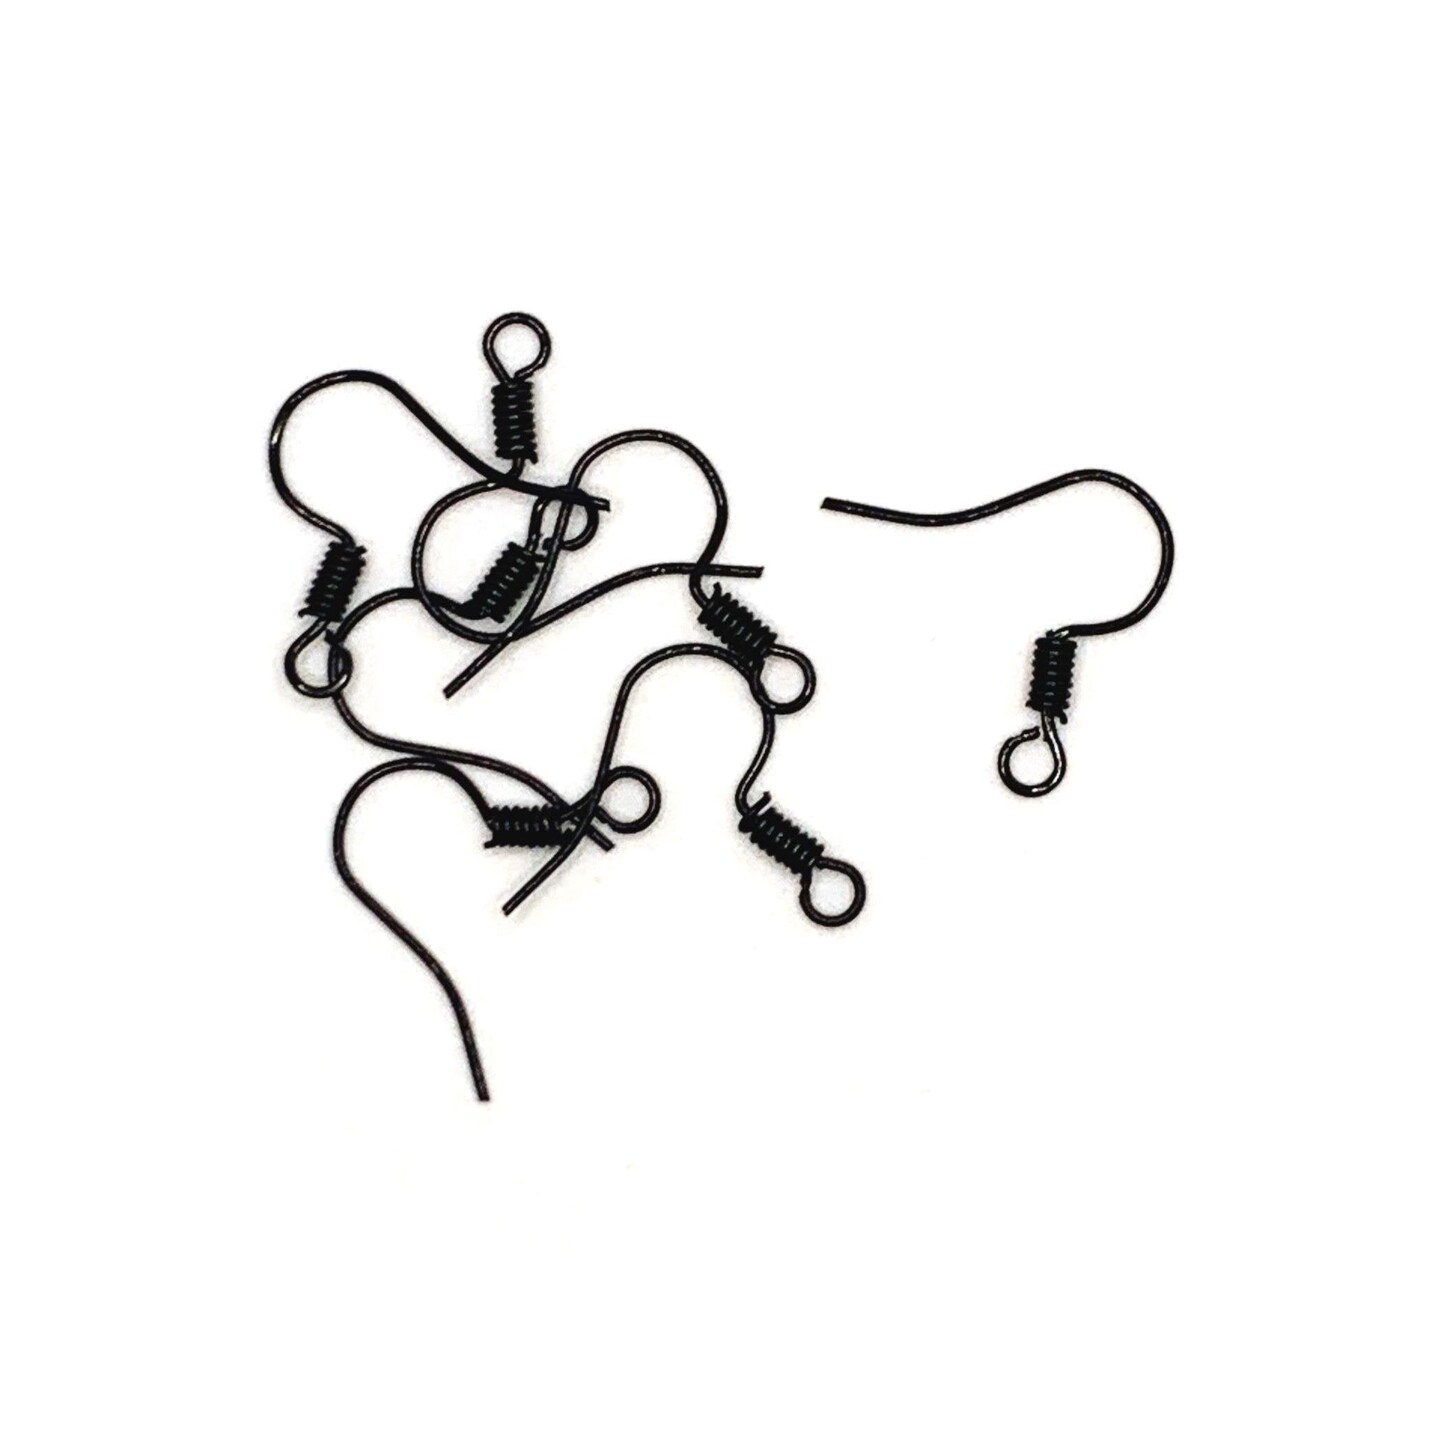 100 or 500 Pieces: Black Fish Hook Earring Wires